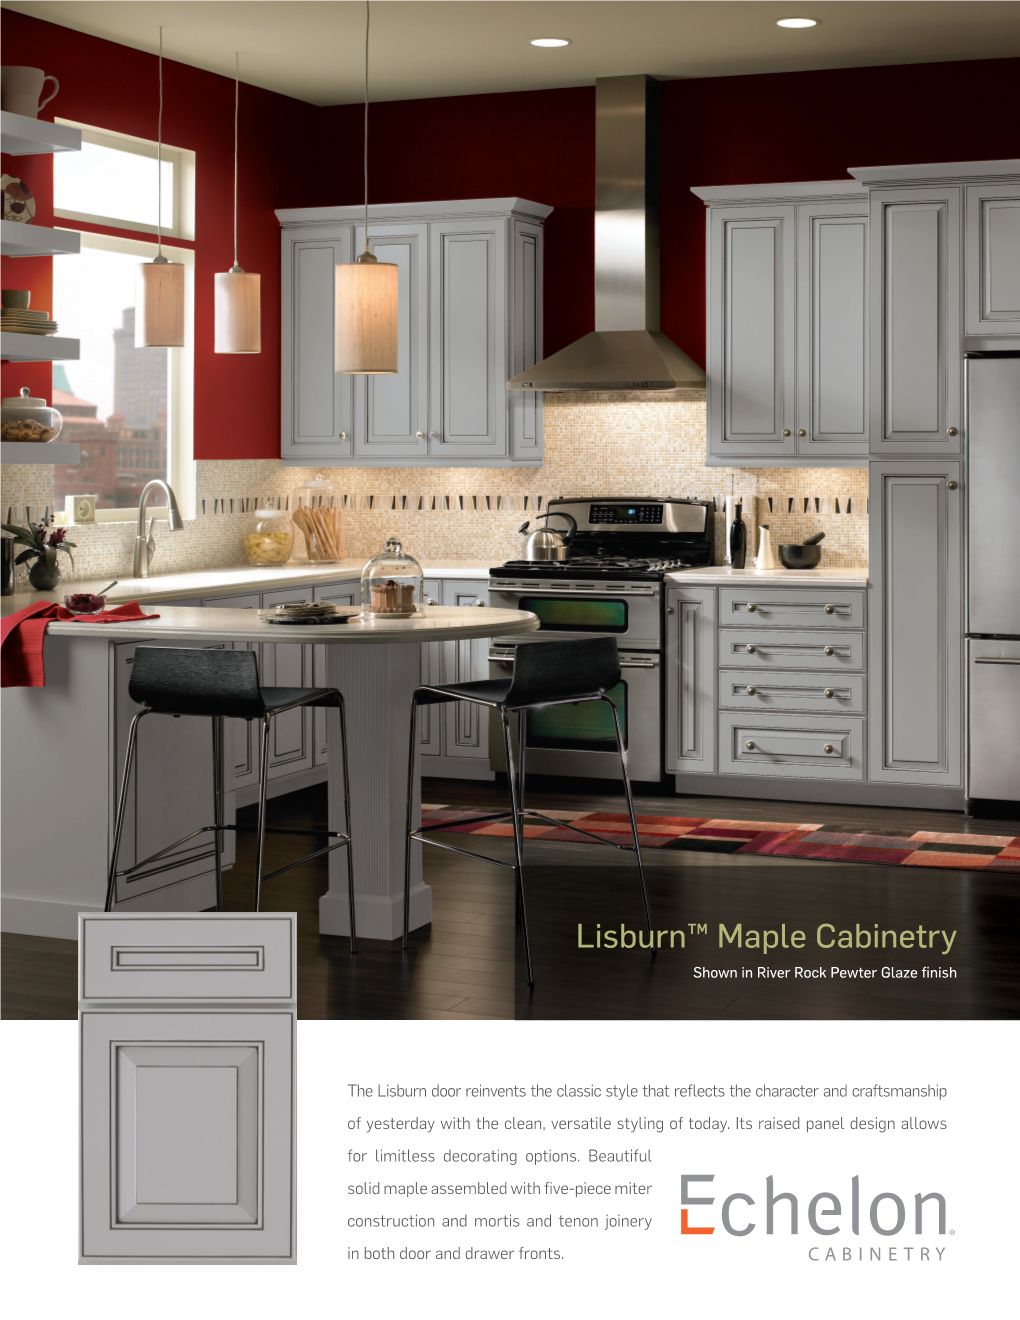 Lisburn™ Maple Cabinetry Shown in River Rock Pewter Glaze Finish